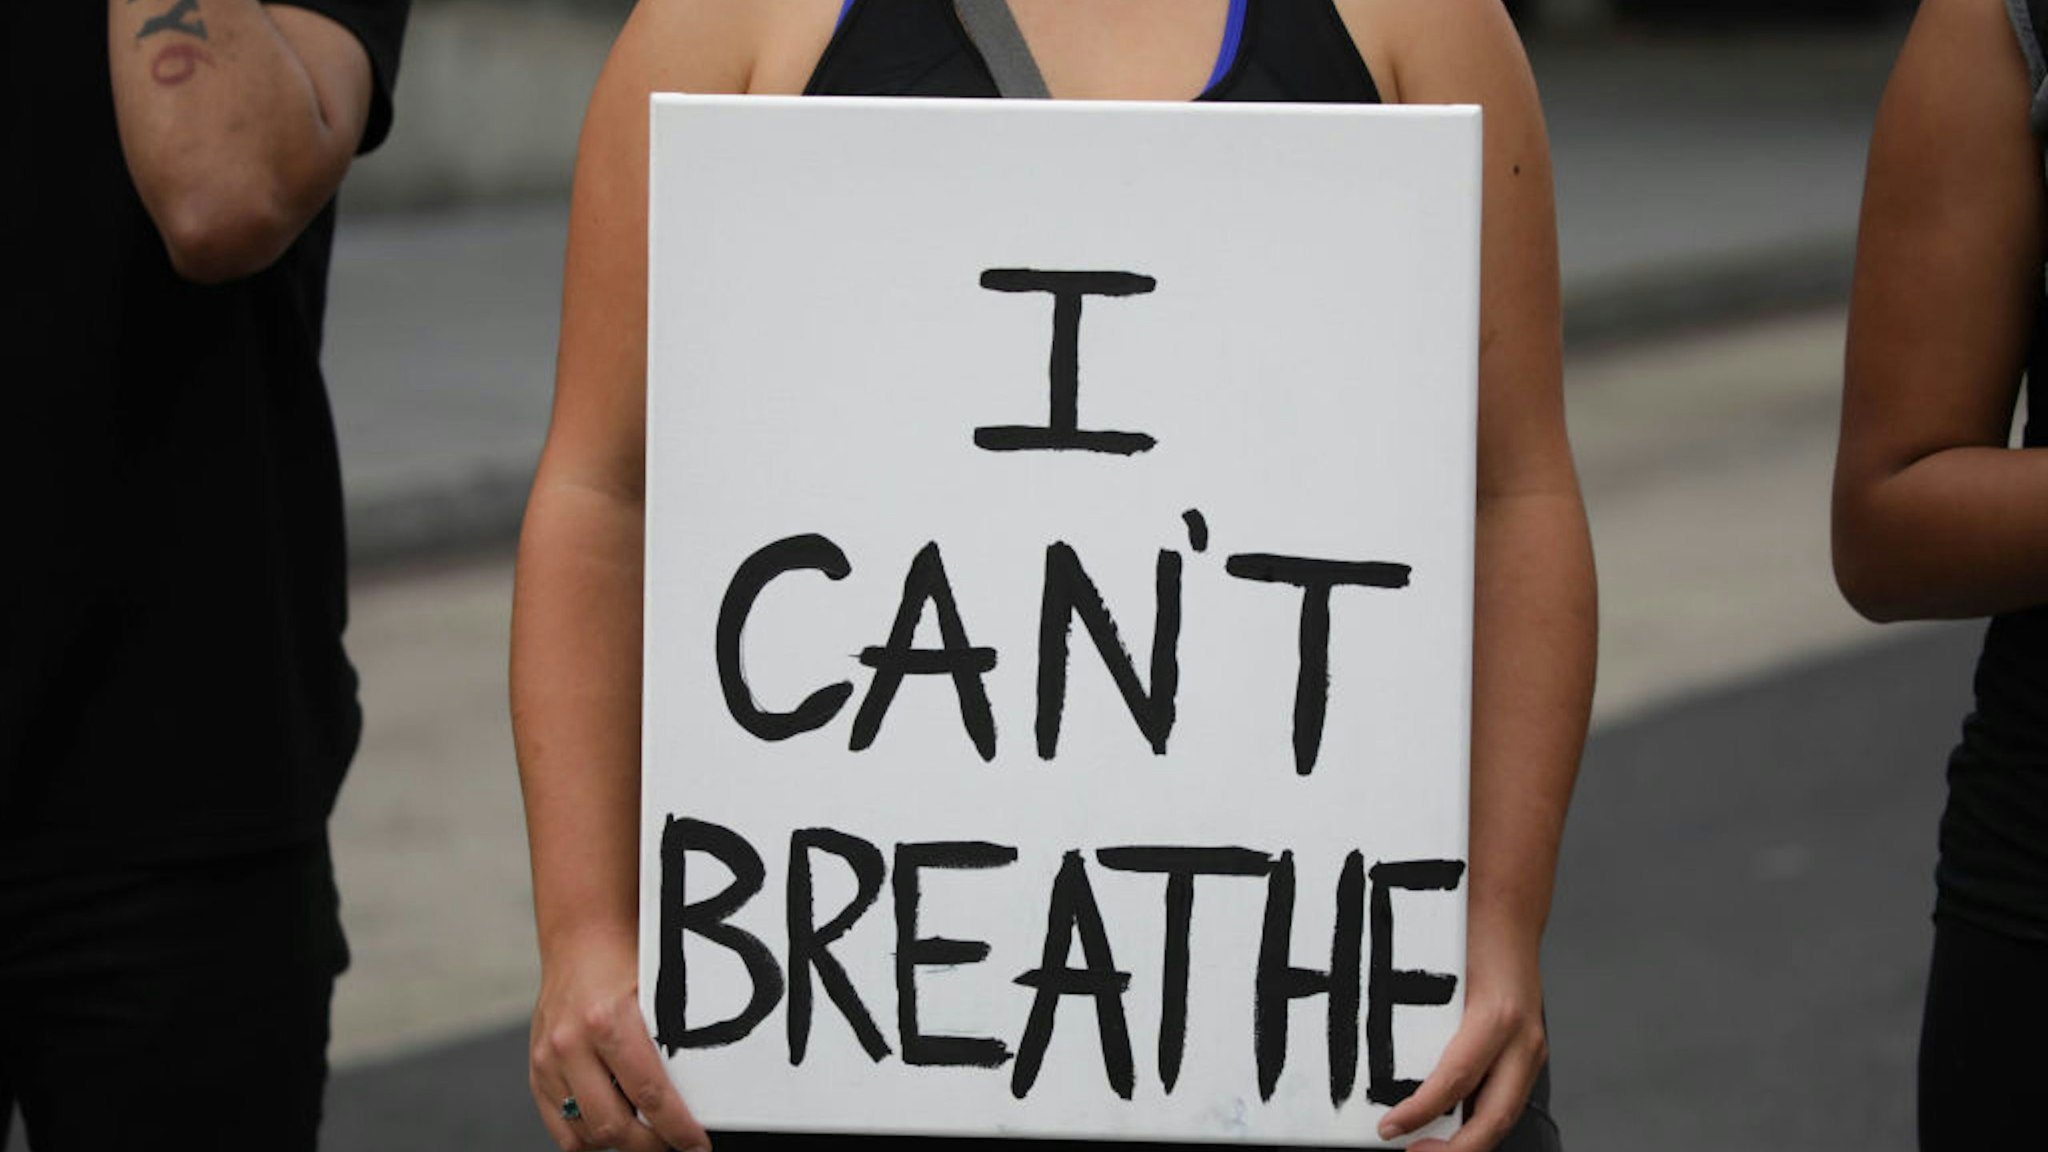 WASHINGTON, USA - MAY 29: A person holds a banner reading "I Can't Breathe", as crowds gather to protest after the death of George Floyd in Washington D.C. United States on May 29, 2020. Floyd, 46, a black man, was arrested Monday after reportedly attempting to use a counterfeit $20 bill at a local store. Video footage on Facebook showed him handcuffed and cooperating. But police claimed he resisted arrest. A white officer kneeled on his neck, despite Floyd√¢s repeated pleas of "I can't breathe." Former police officer Derek Chauvin was charged with third-degree murder and manslaughter, according to Hennepin County Prosecutor Michael Freeman. Minneapolis, Minnesota Mayor Jacob Frey said Friday he imposed a mandatory curfew because of ongoing protests regarding the death of George Floyd.